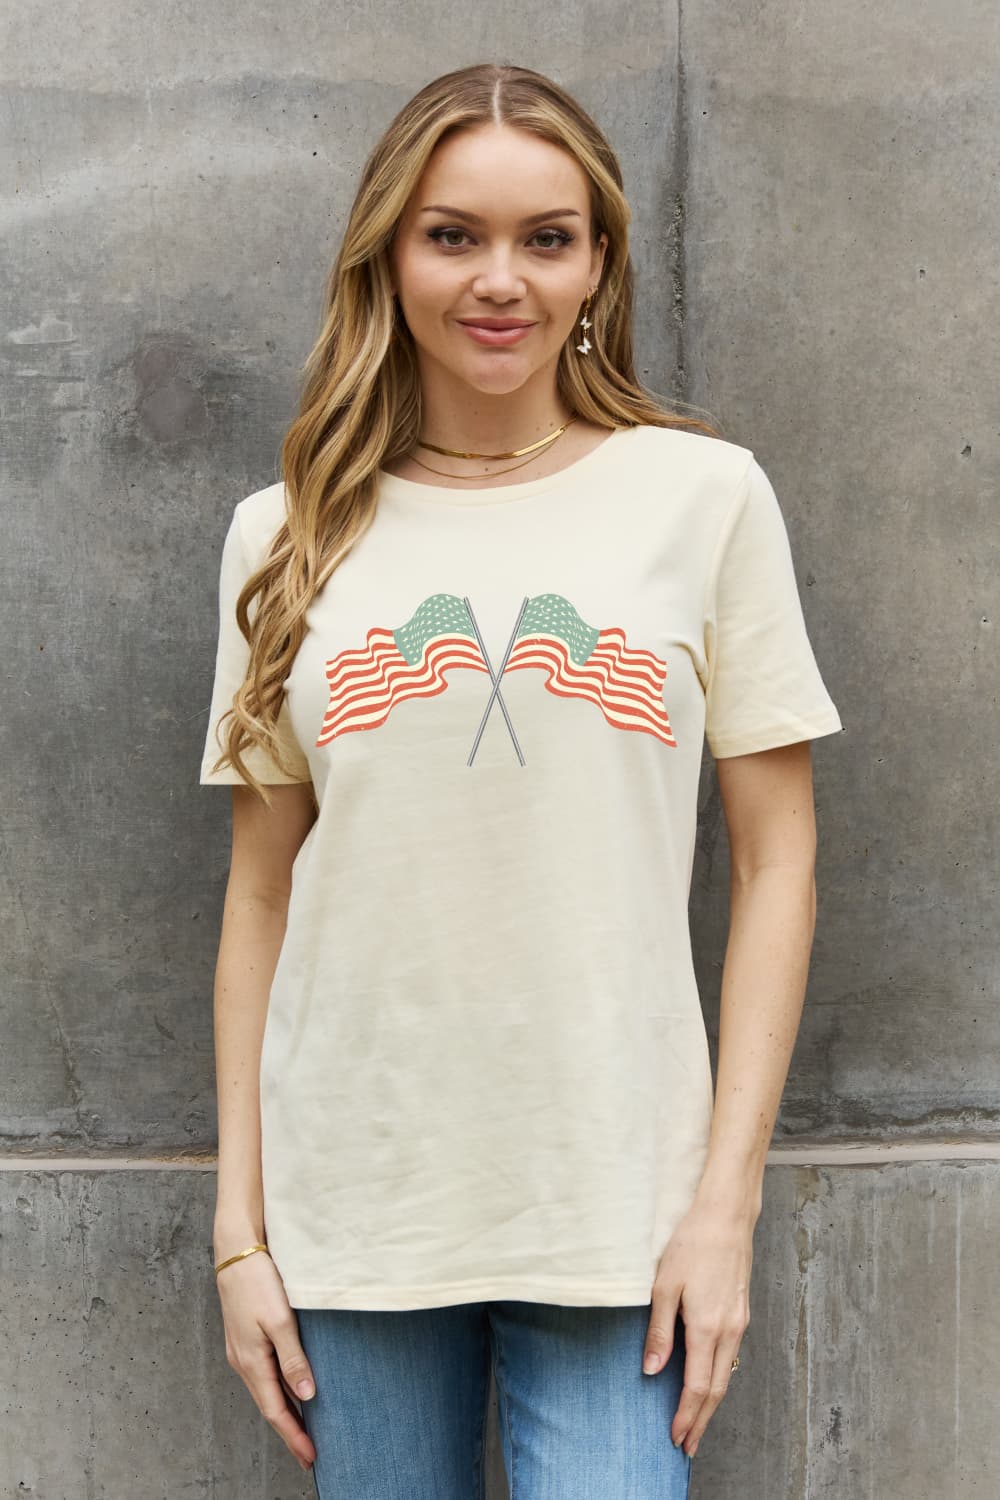 Simply Love US Flag Graphic Cotton Tee - OMG! Rose